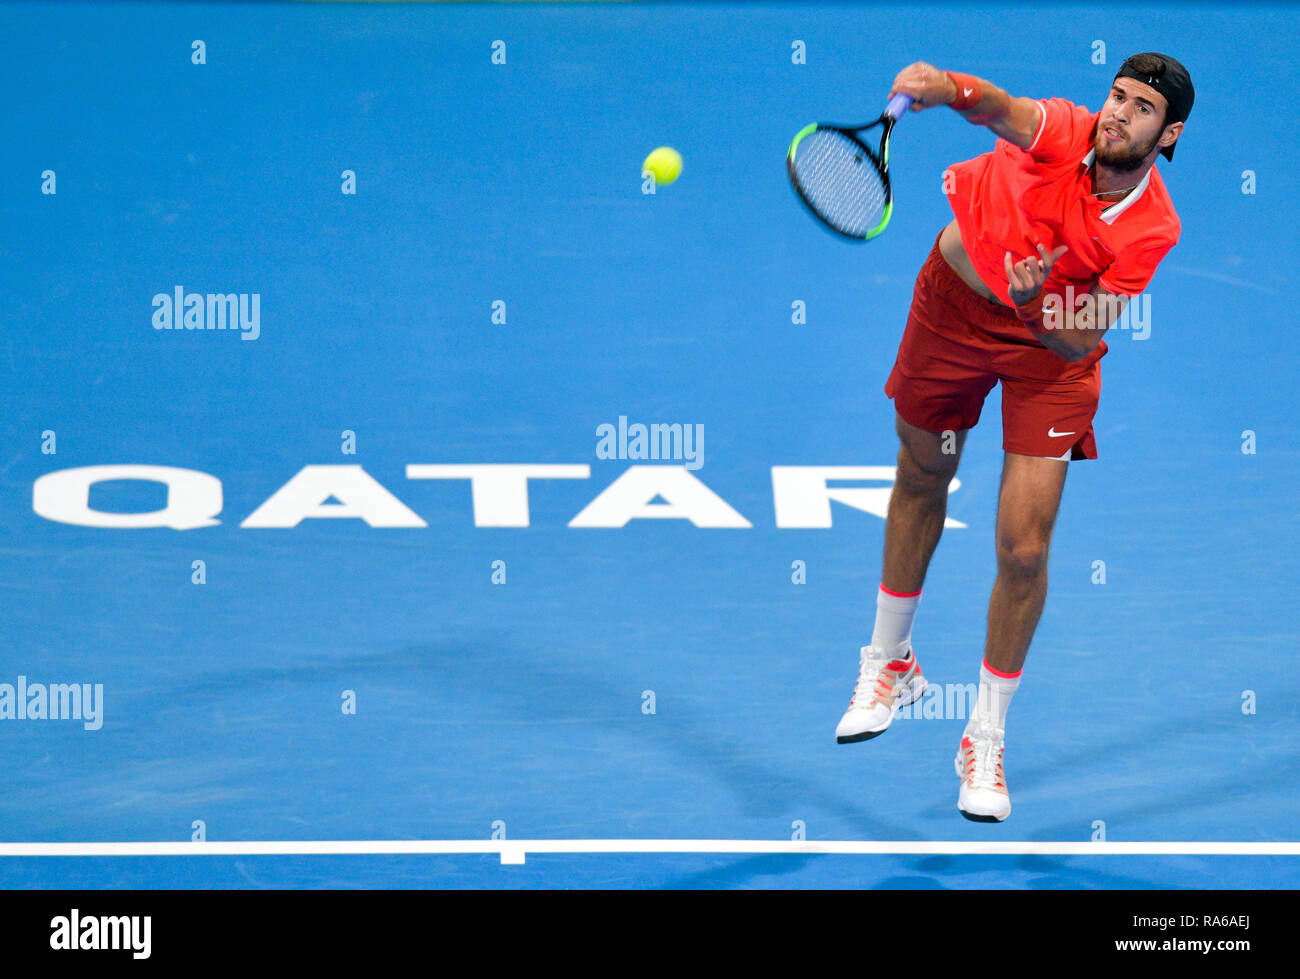 Doha, Qatar. 1st Jan, 2019. Karen Khachanov of Russia serves during the  singles first round match against Stan Wawrinka of Switzerland at the ATP  Qatar Open Tennis match in Doha, capital of